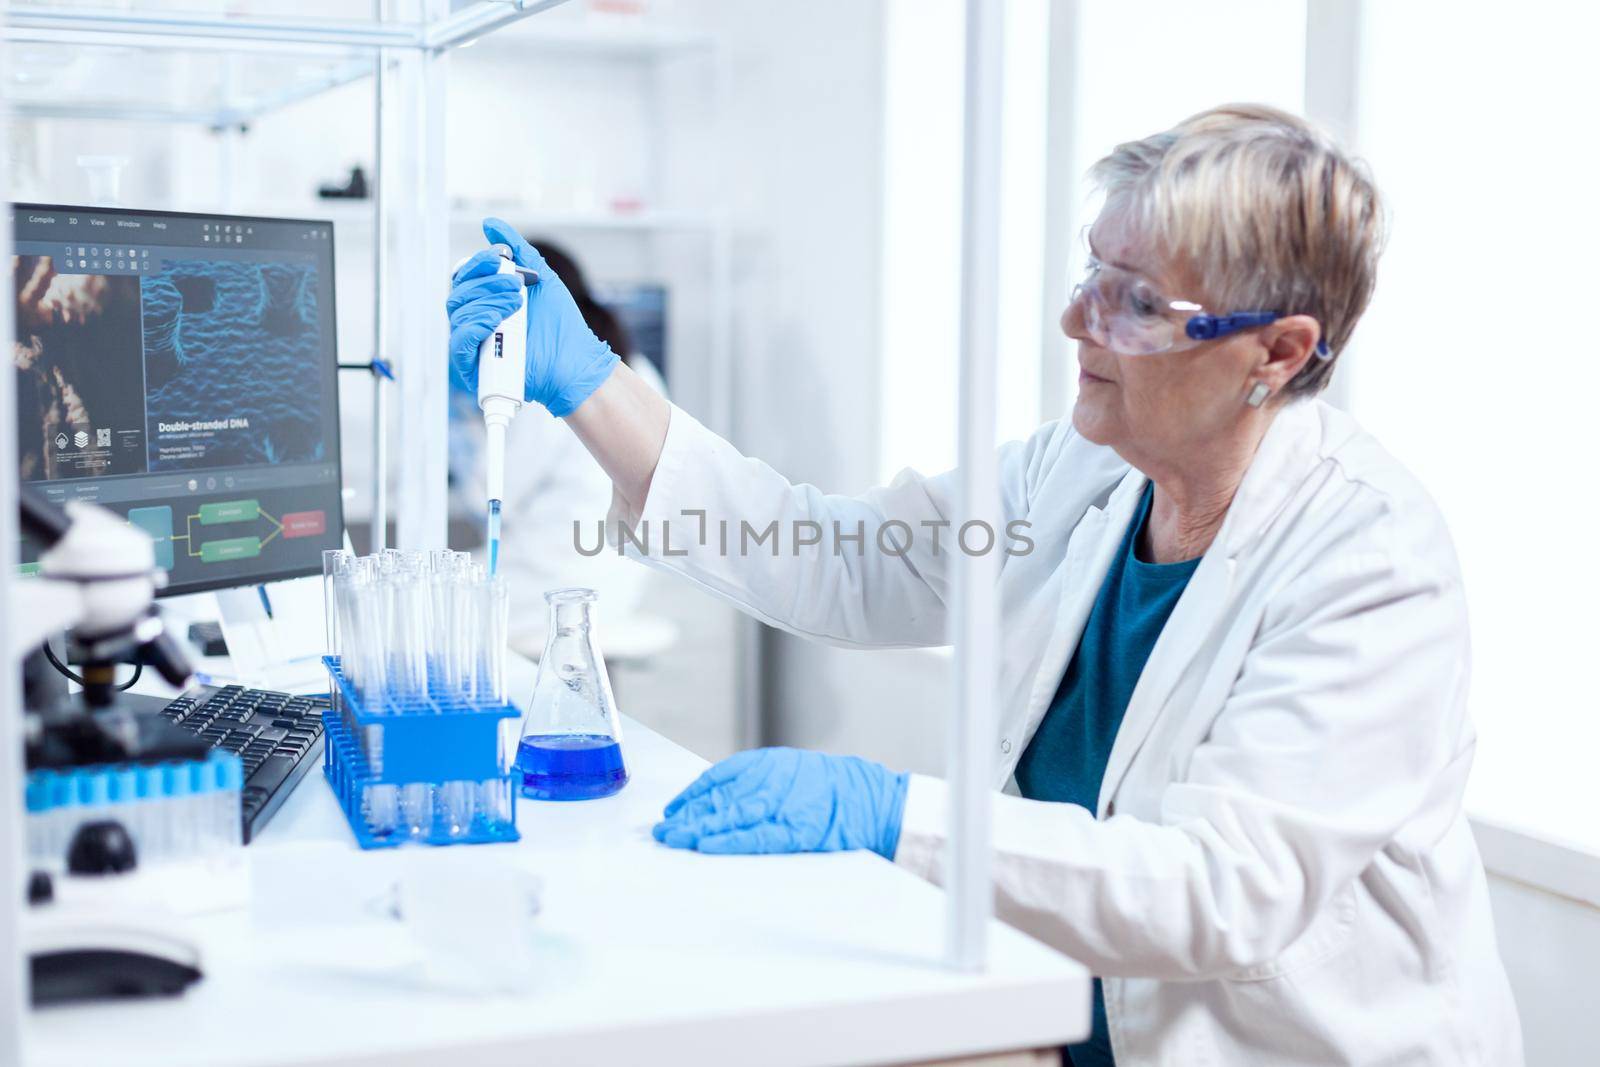 Senior scientist filling test tube wearing protective equipment using molecular dispenser. People in innovative pharmaceutical laboratory with modern medical equipment for genetics research.